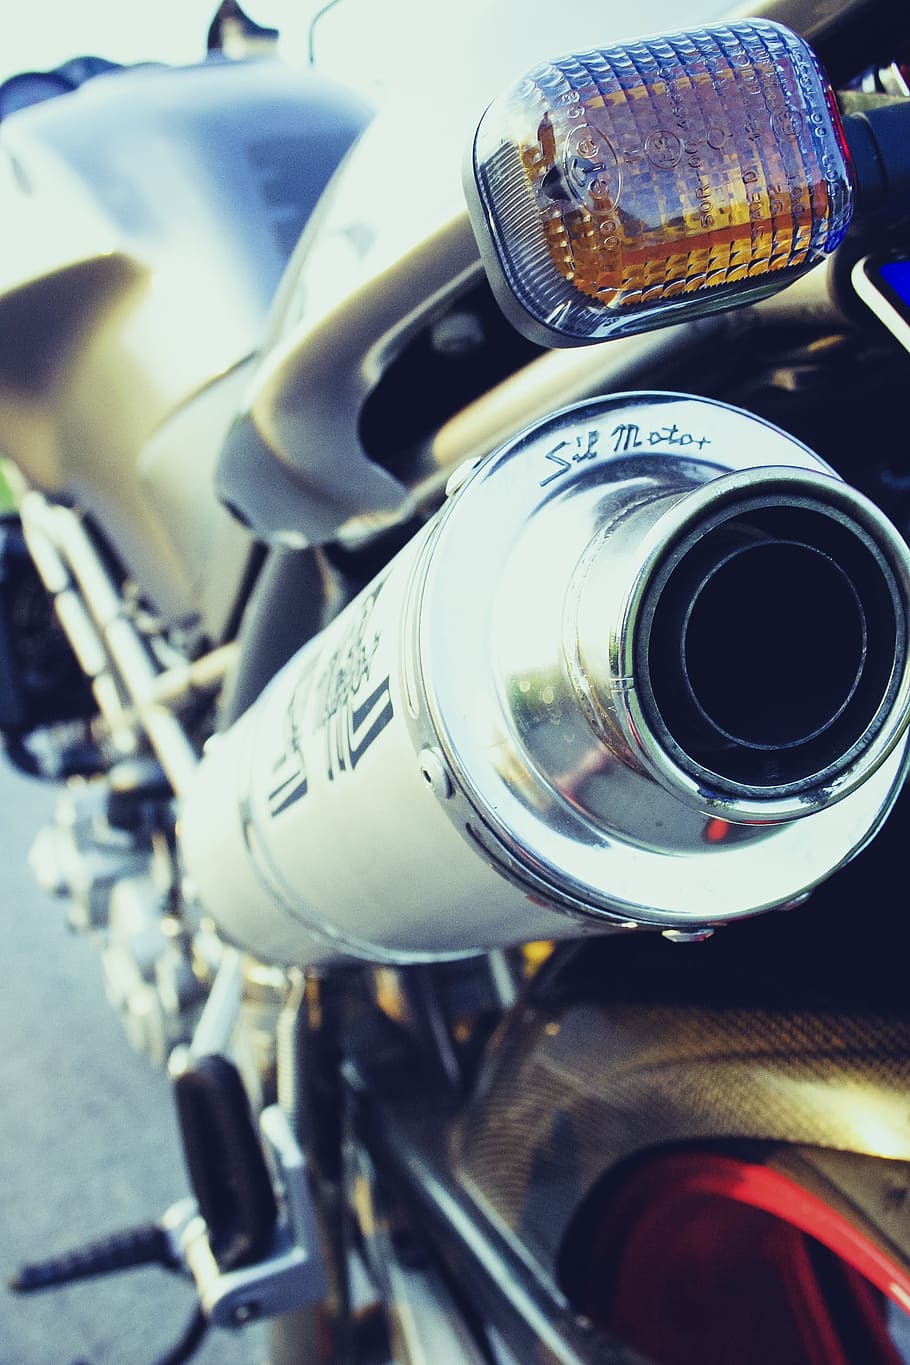 chrome-colored motorcycle muffler, motorcycle, exhaust, metal, chrome, two wheeled vehicle, technology, exhaust pipes, sparkle, motor